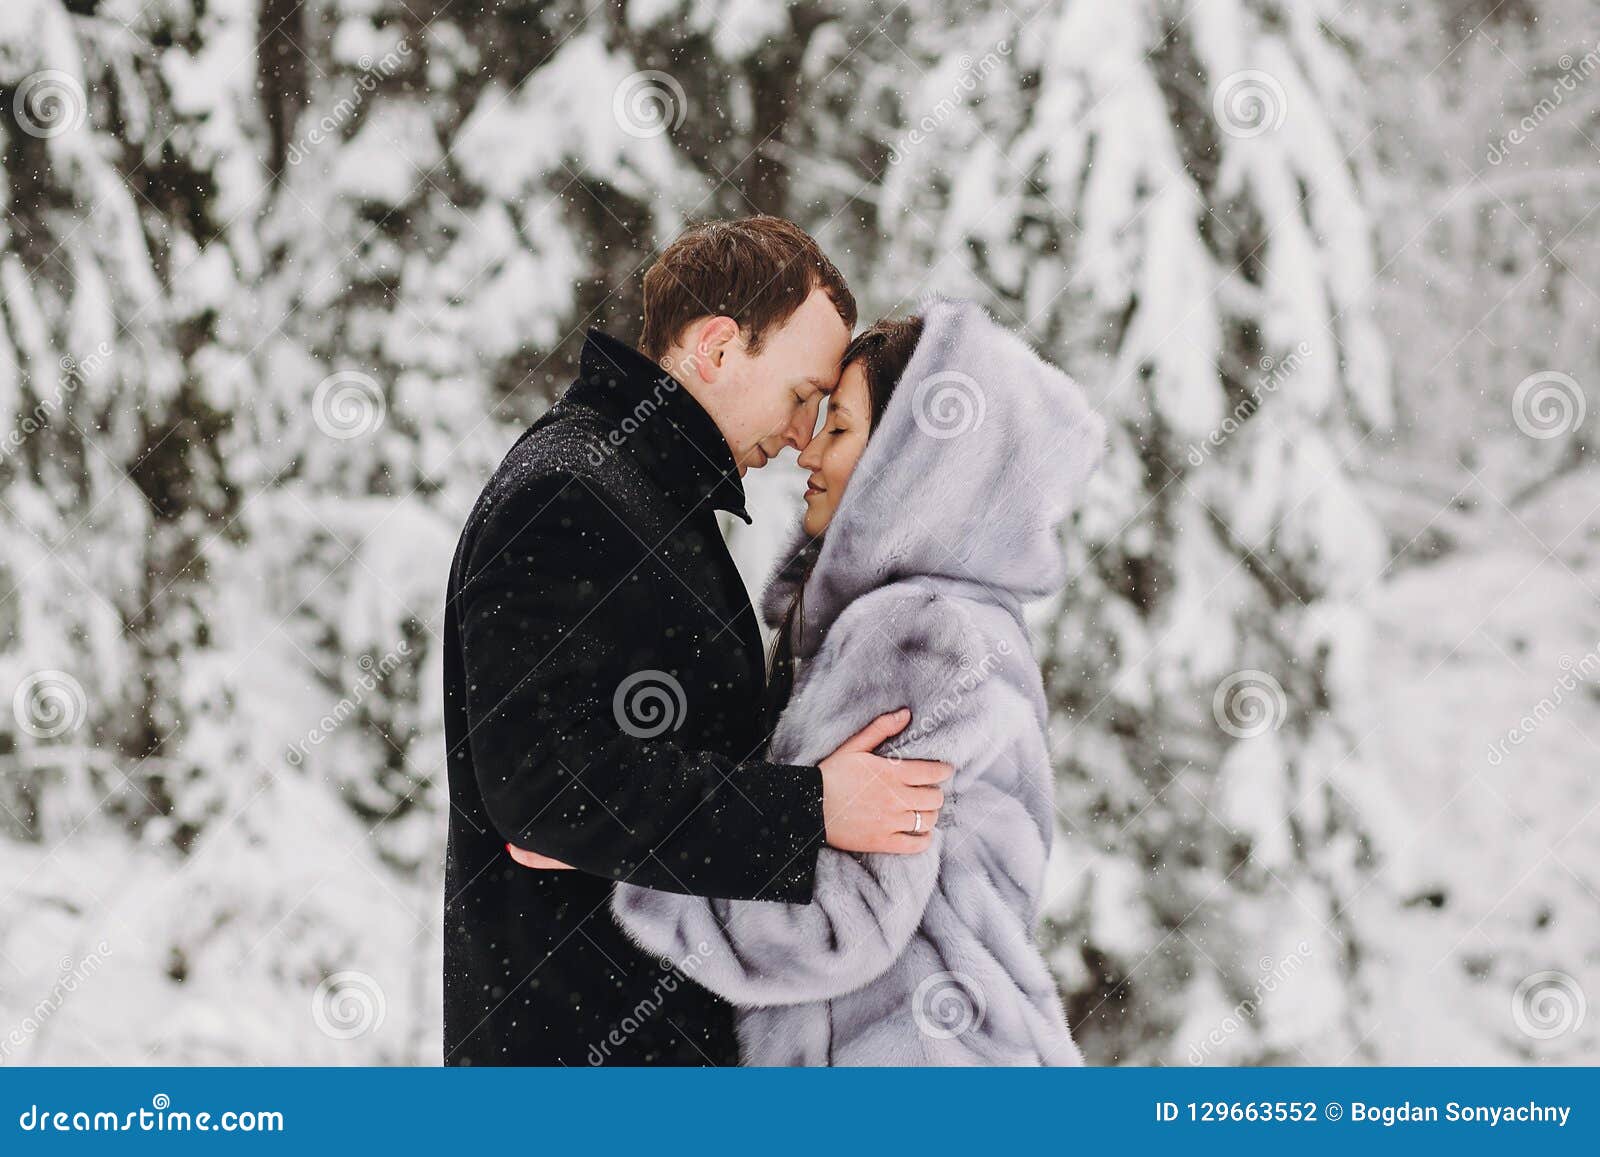 Stylish Couple Embracing in Winter Snowy Mountains. Happy Romantic ...